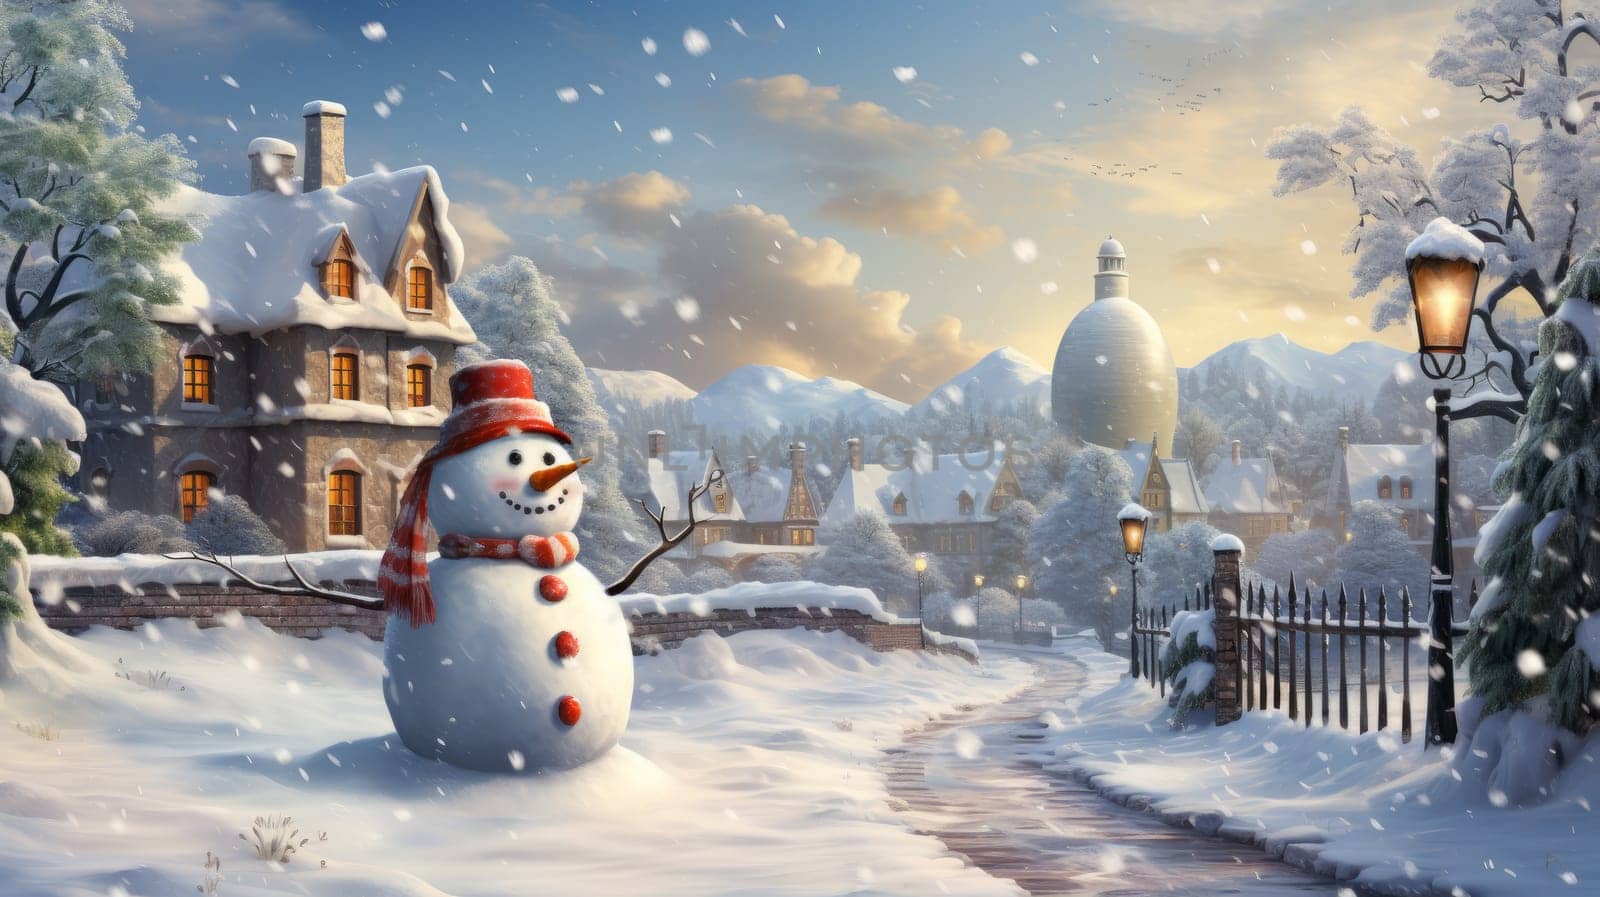 Cartoon postcard snowman in front of a snow-covered house, cozy atmosphere of the family holidays of Christmas and New Year, holiday winter greeting card AI